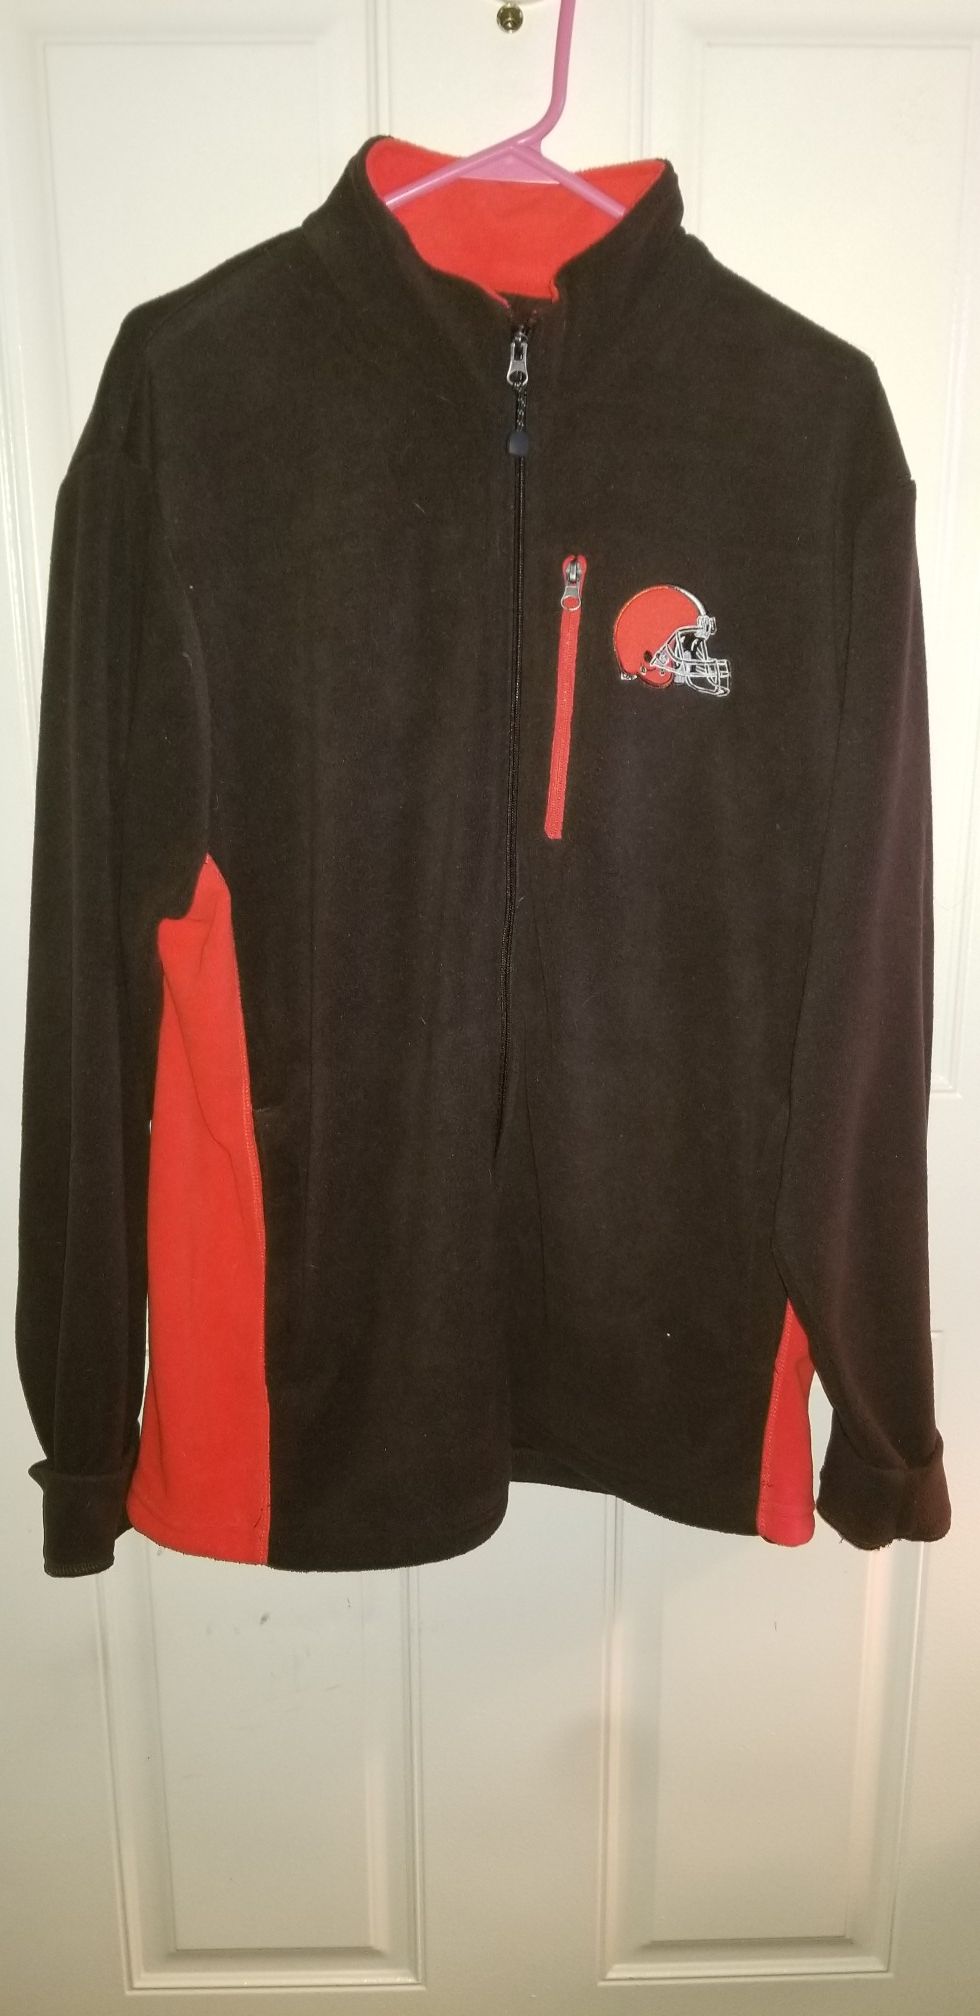 Cleveland Browns Size Large Zip up Fleece